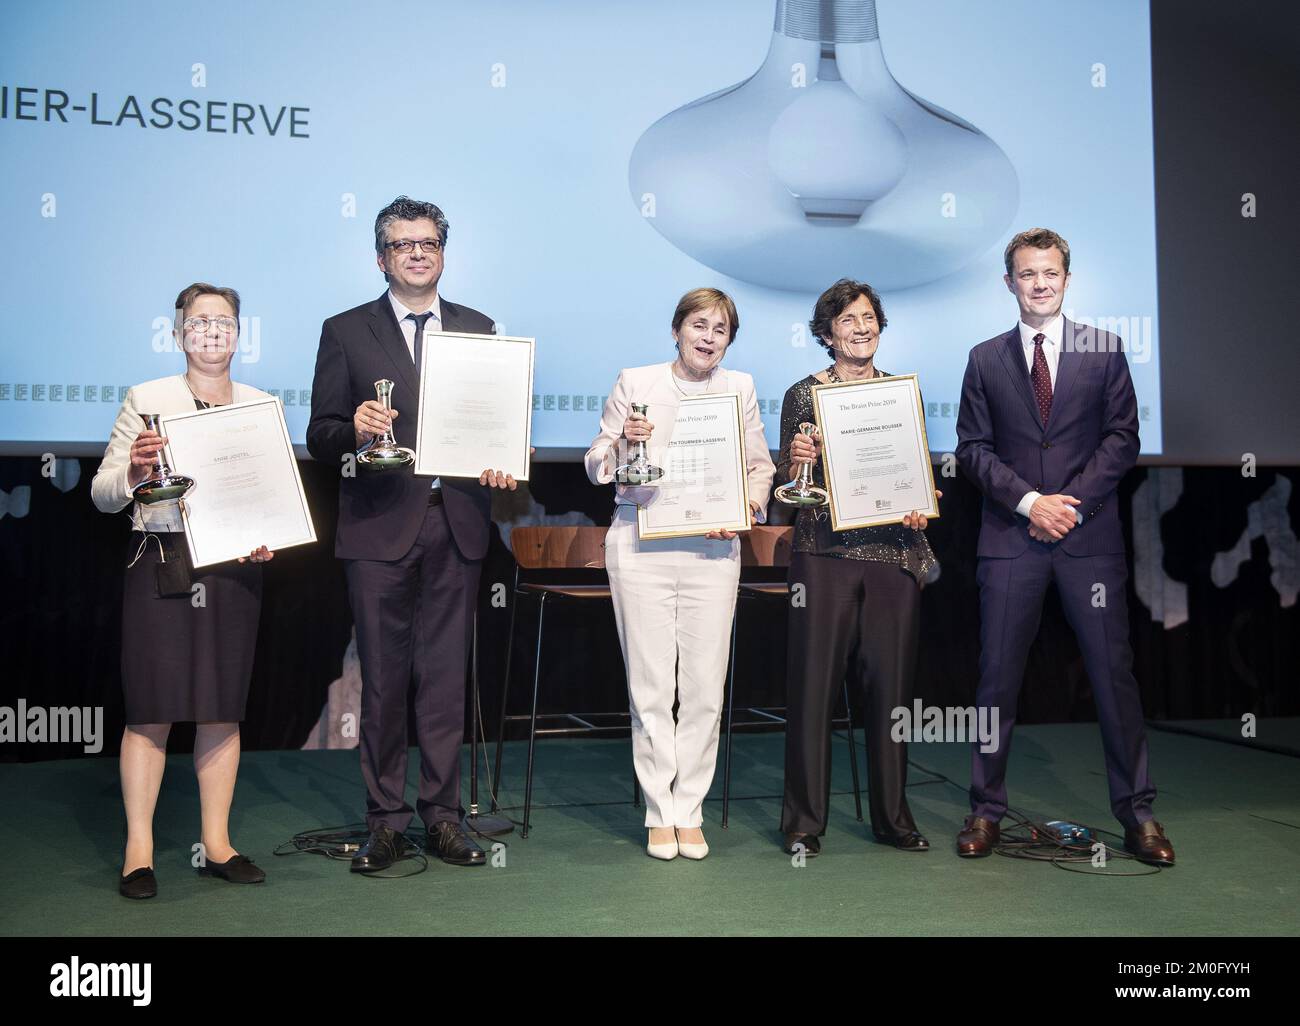 On May 9th 2019 HRH Crown Prince Frederik presented The Brain Prize 2019 at the Danish Royal Library in Copenhagen. The Brain Prize 2019 was awarded to Marie-Germaine Bousser, Hugues Chabriat, Anne Joutel and Elisabeth Tournier-Lasserve. Aiming for treatment they have spent more than 30 years describing, understanding and diagnosing the most common inherited form of stroke, CADASIL. Stock Photo